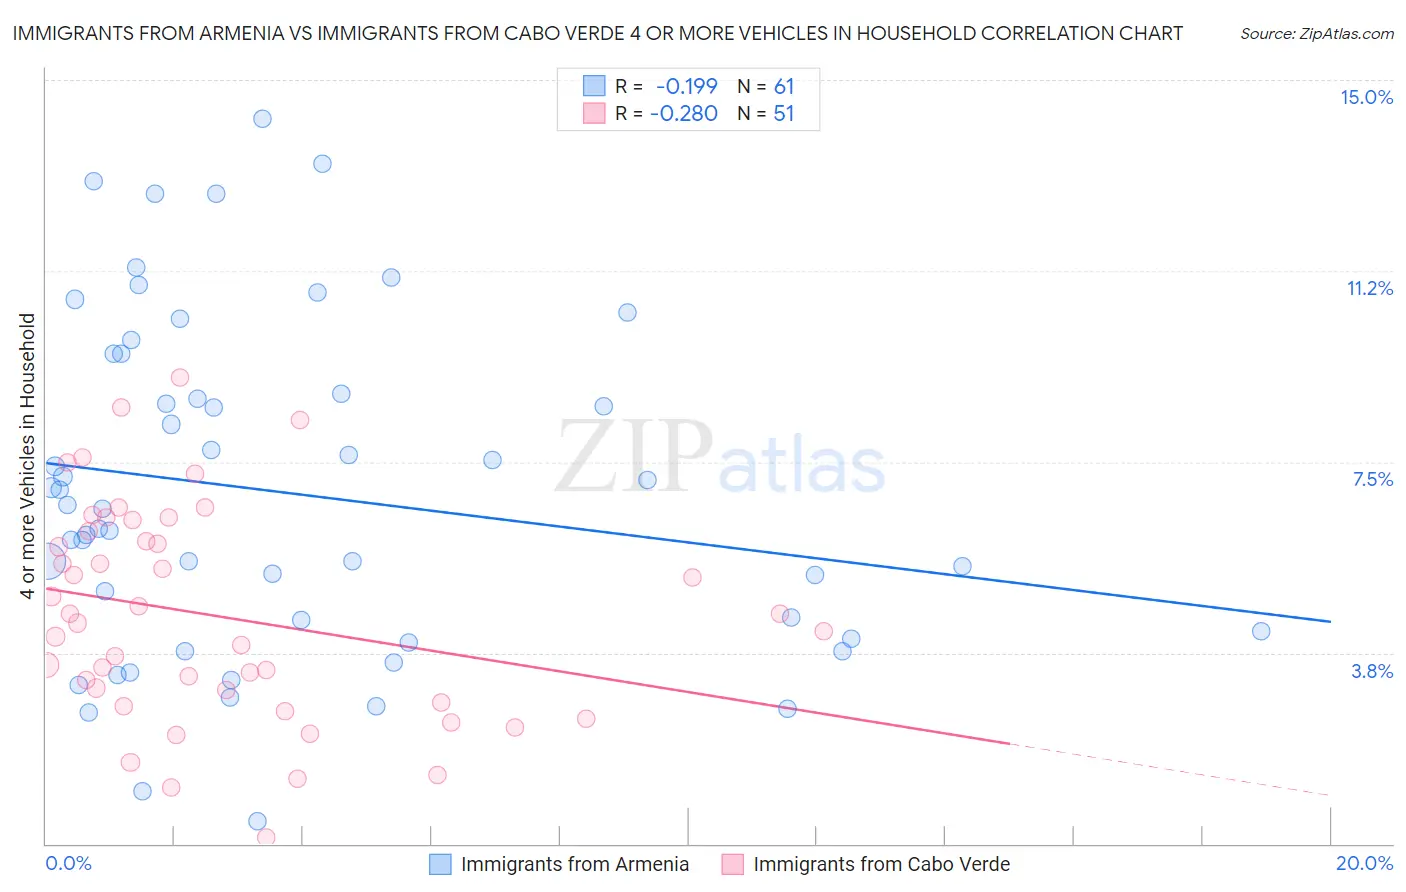 Immigrants from Armenia vs Immigrants from Cabo Verde 4 or more Vehicles in Household